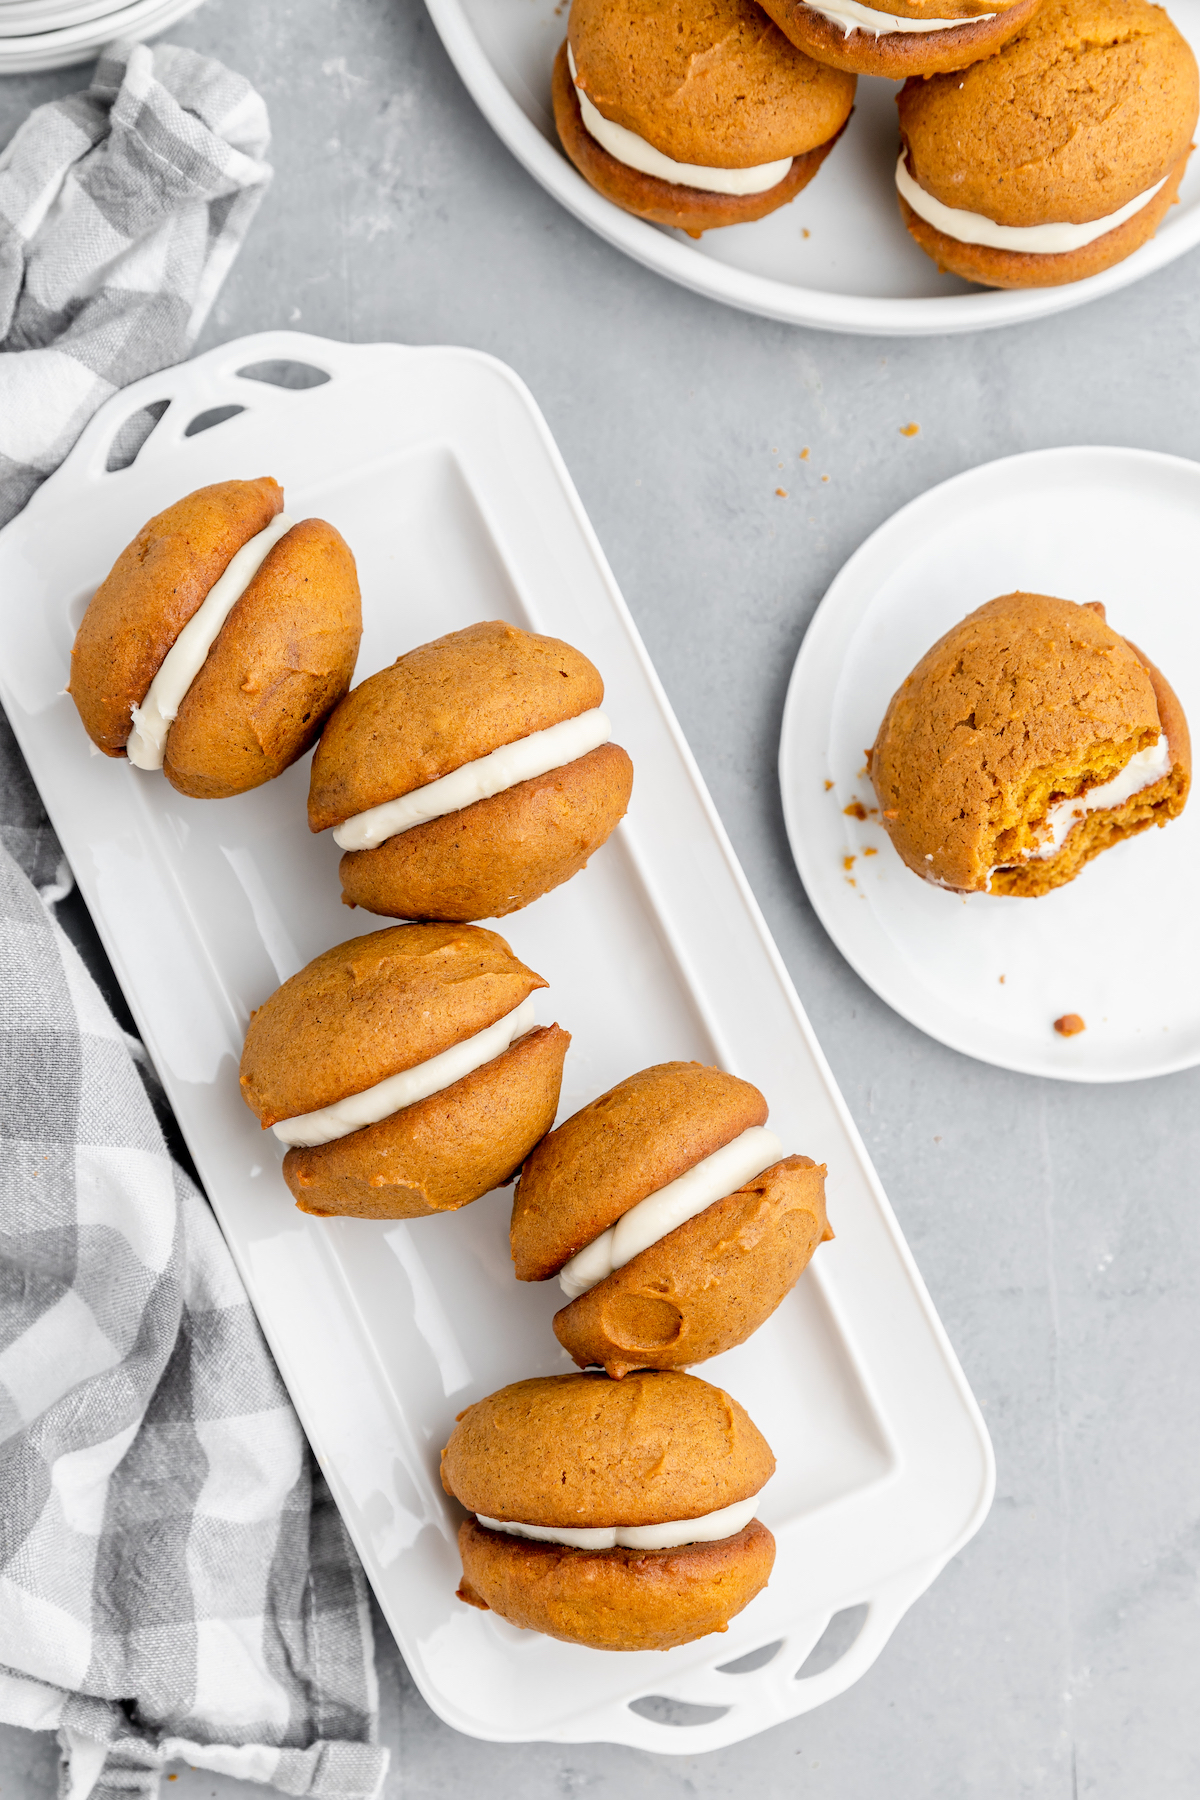 White serving plates with pumpkin whoopie pies arranged on them. One pie is on a small white dessert plate.